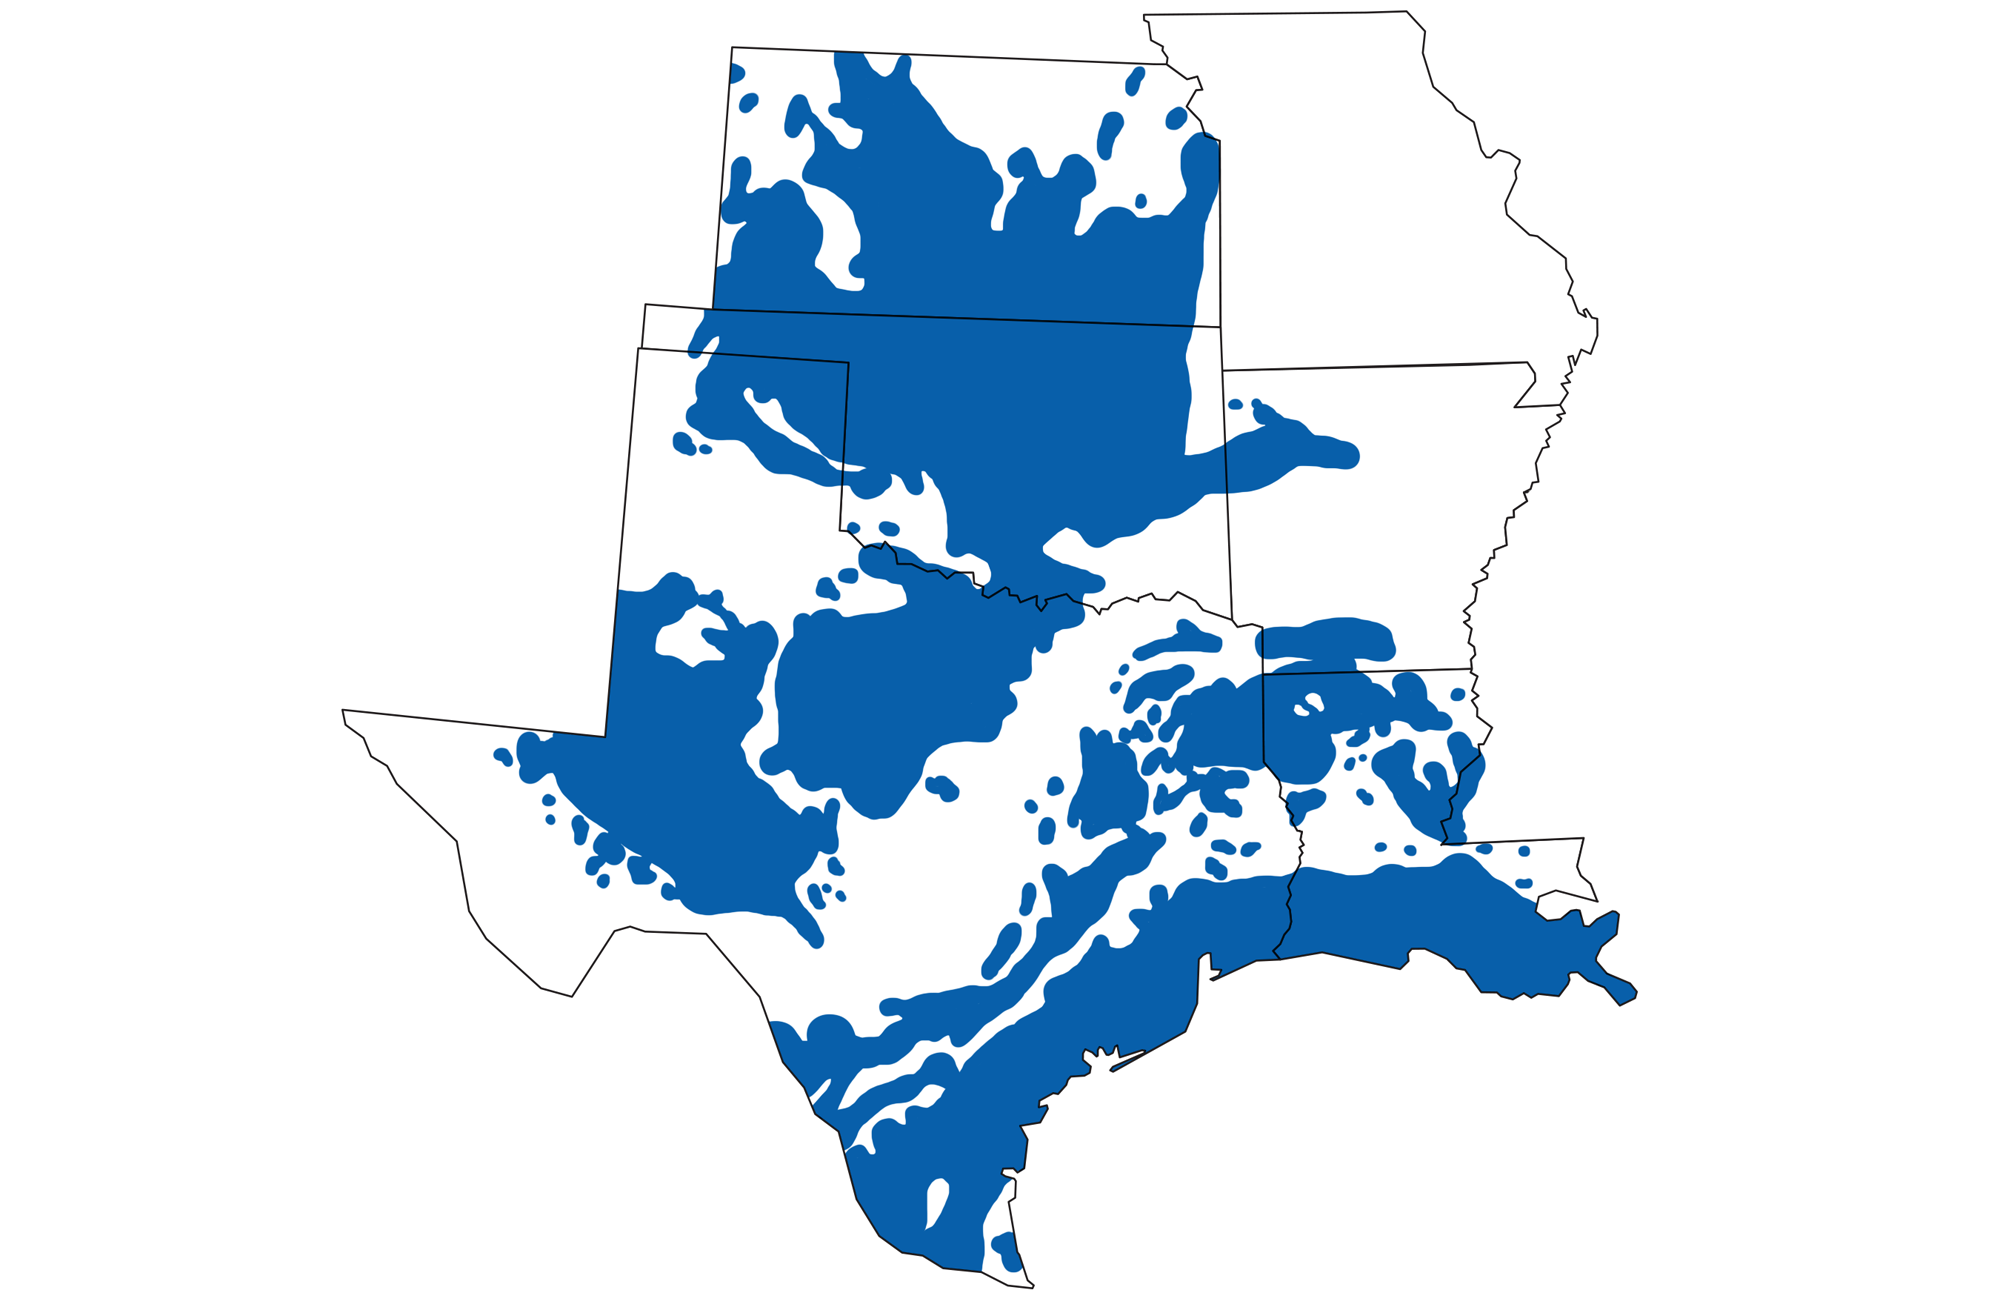 Map of the south-central U.S. showing state borders with areas of oil and gas production shaded in blue. Much of Kansas, Oklahoma, Texas, and Louisiana are shaded, with a little shading in northwestern and southwestern Arkansas.